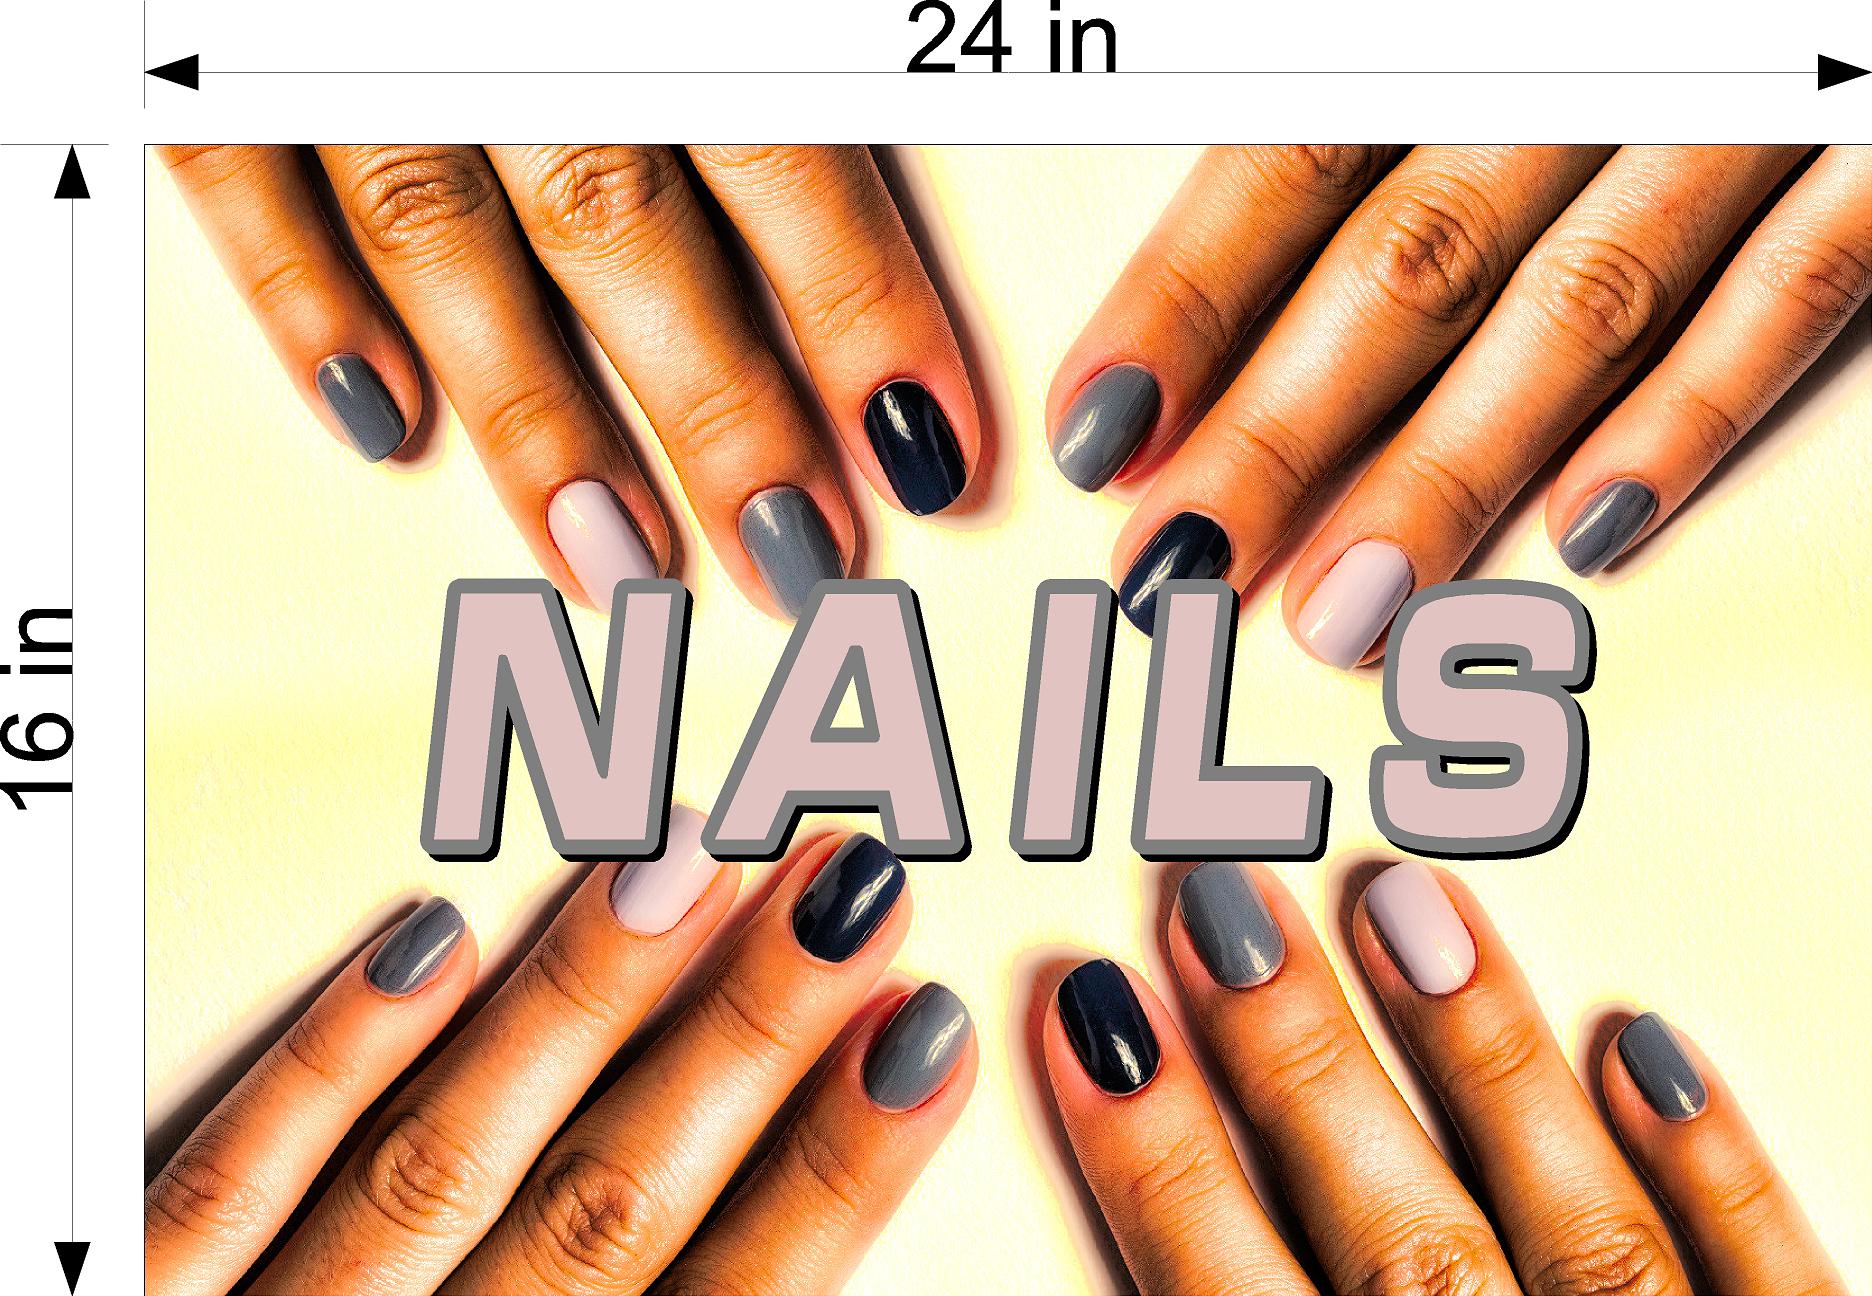 Nails 12 Wallpaper Poster Decal with Adhesive Backing Wall Sticker Decor Indoors Interior Sign Horizontal